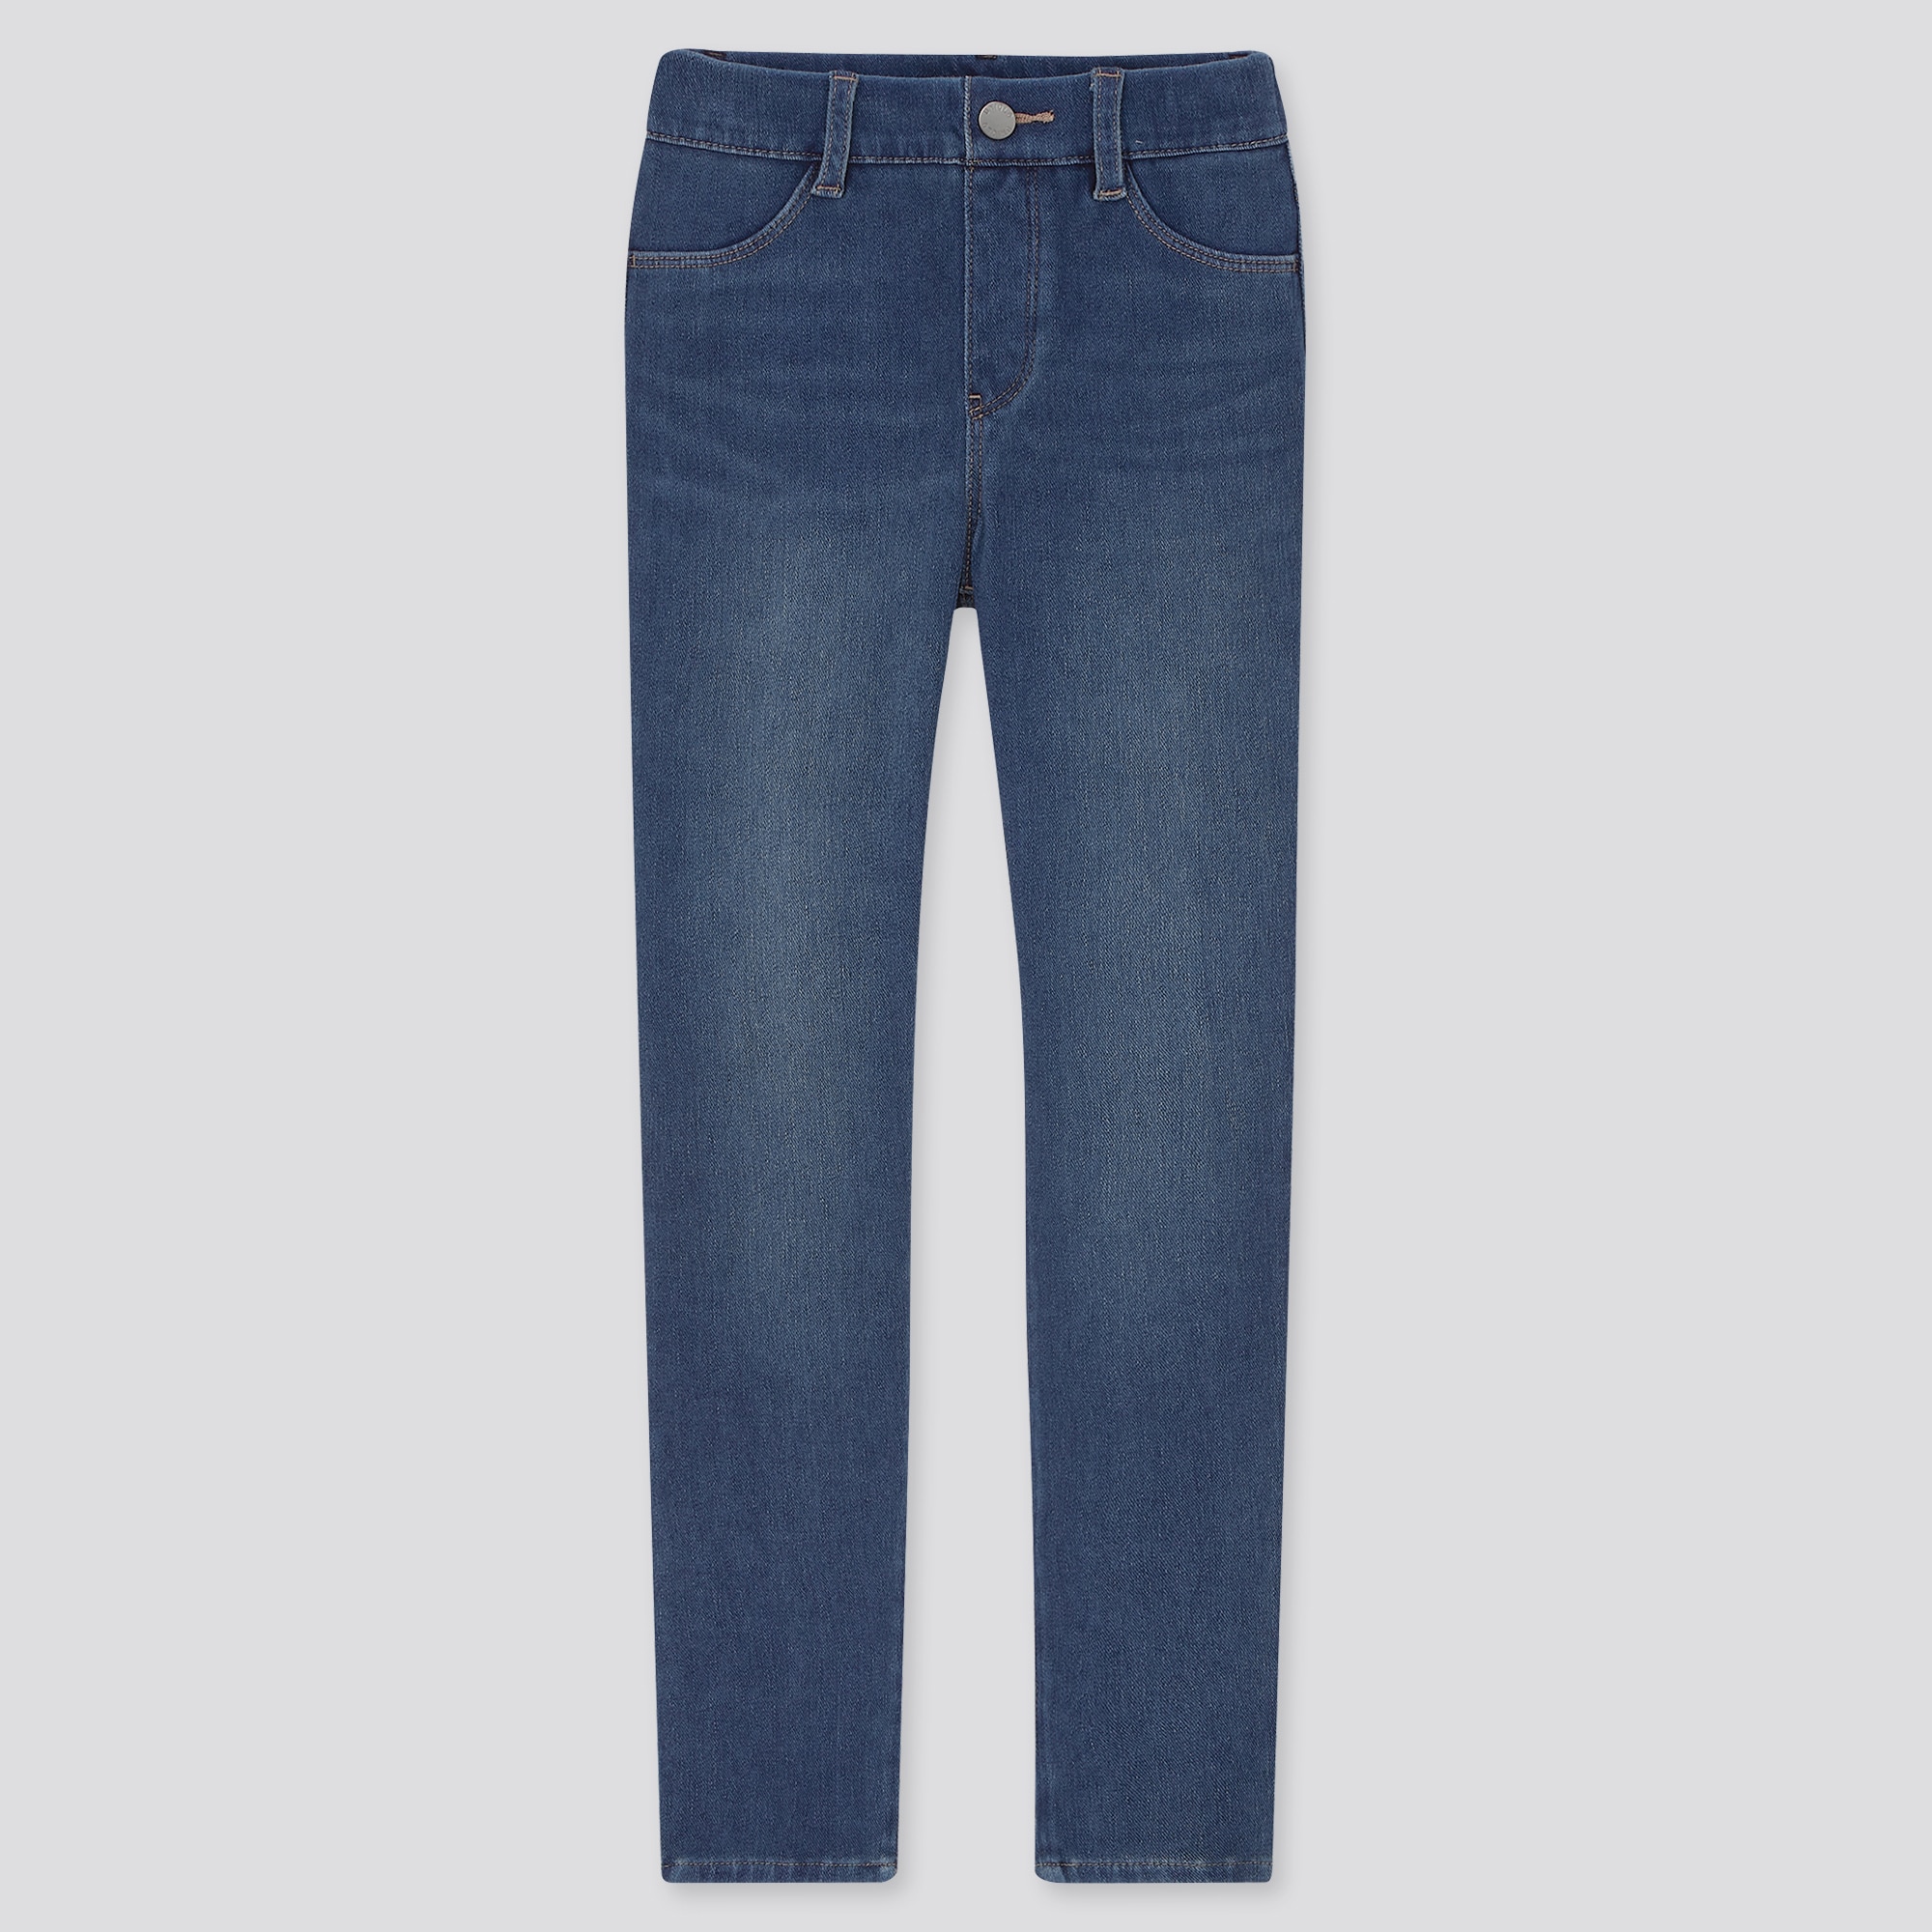 Uniqlo Ultra Stretch Denim Leggings Pants – the best products in